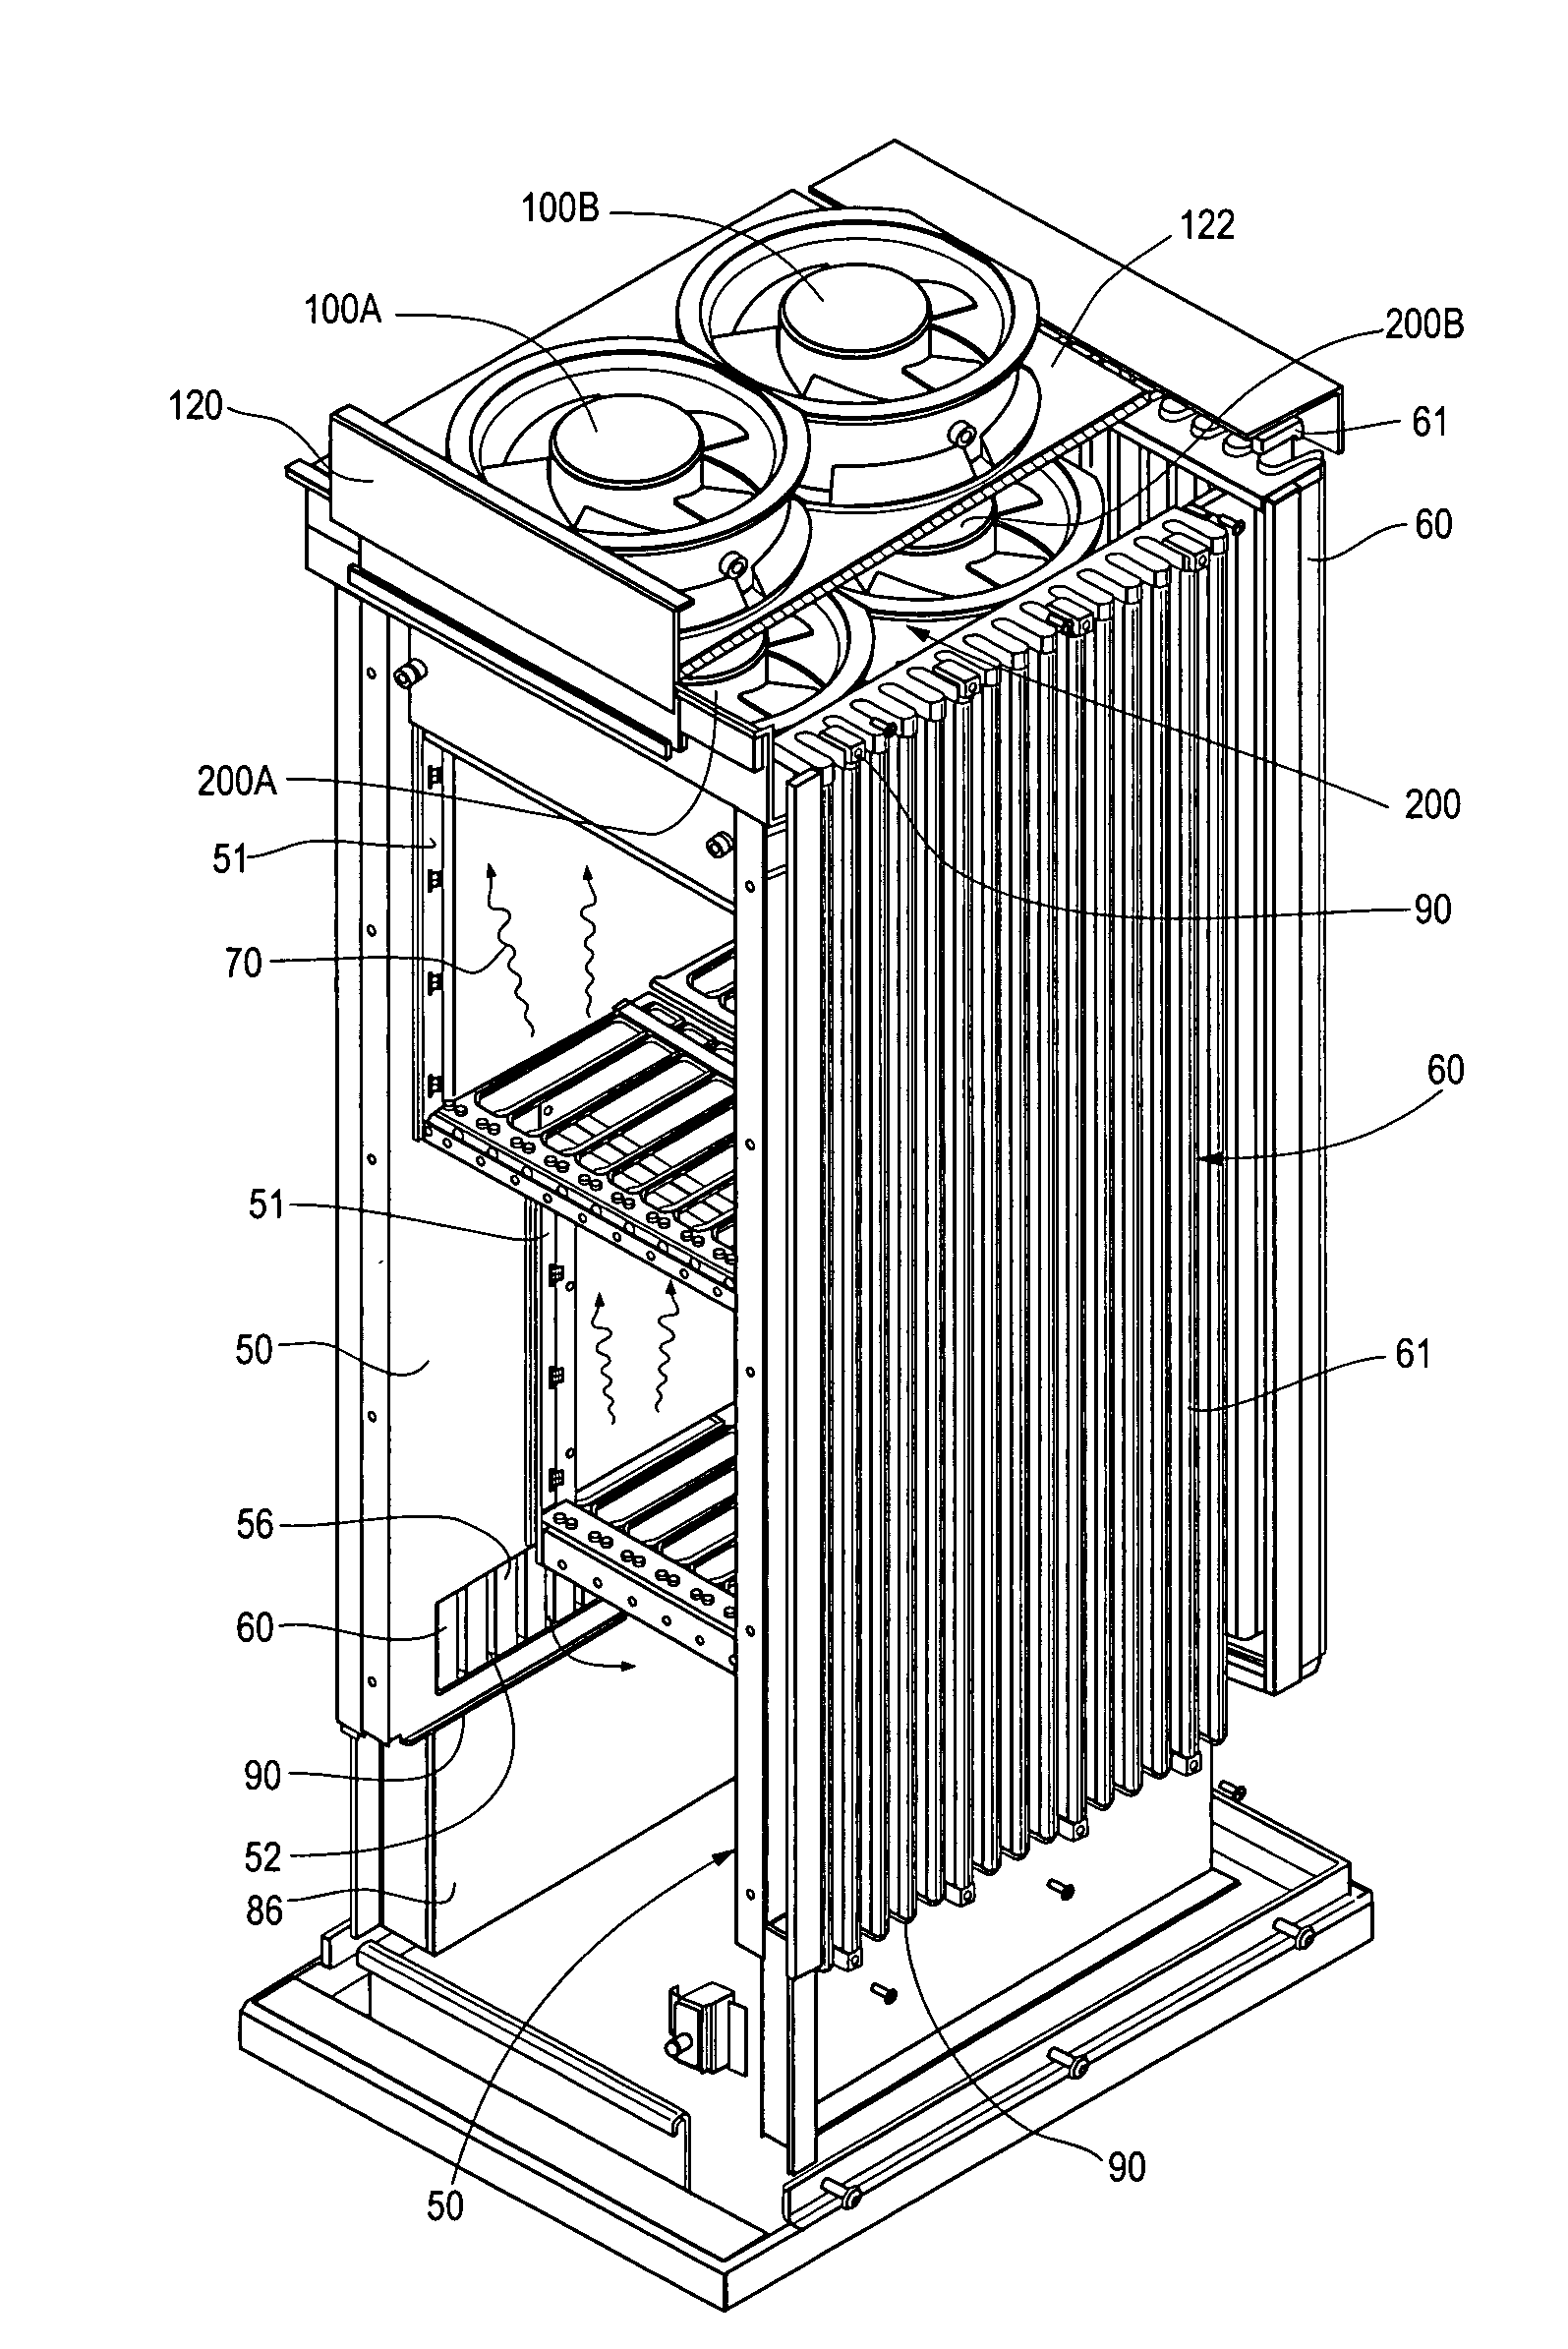 Electronics cabinet with internal air-to-air heat exchanger